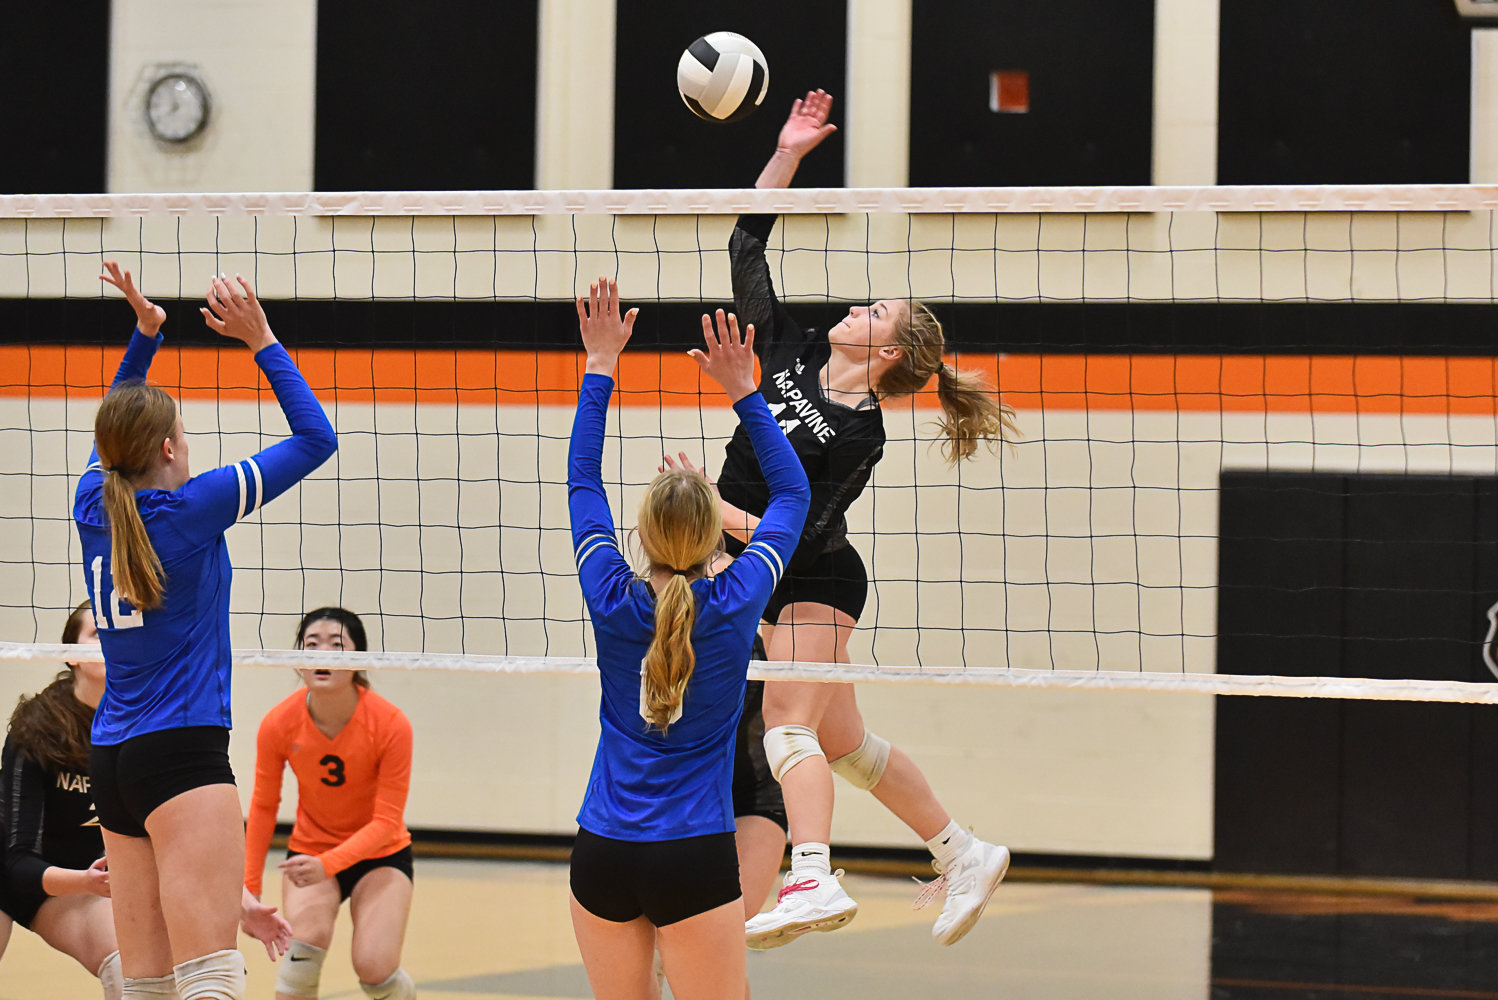 Morgan Hamilton goes up for a spike during the second set of Napavine's match against Toutle Lake on Oct. 26.